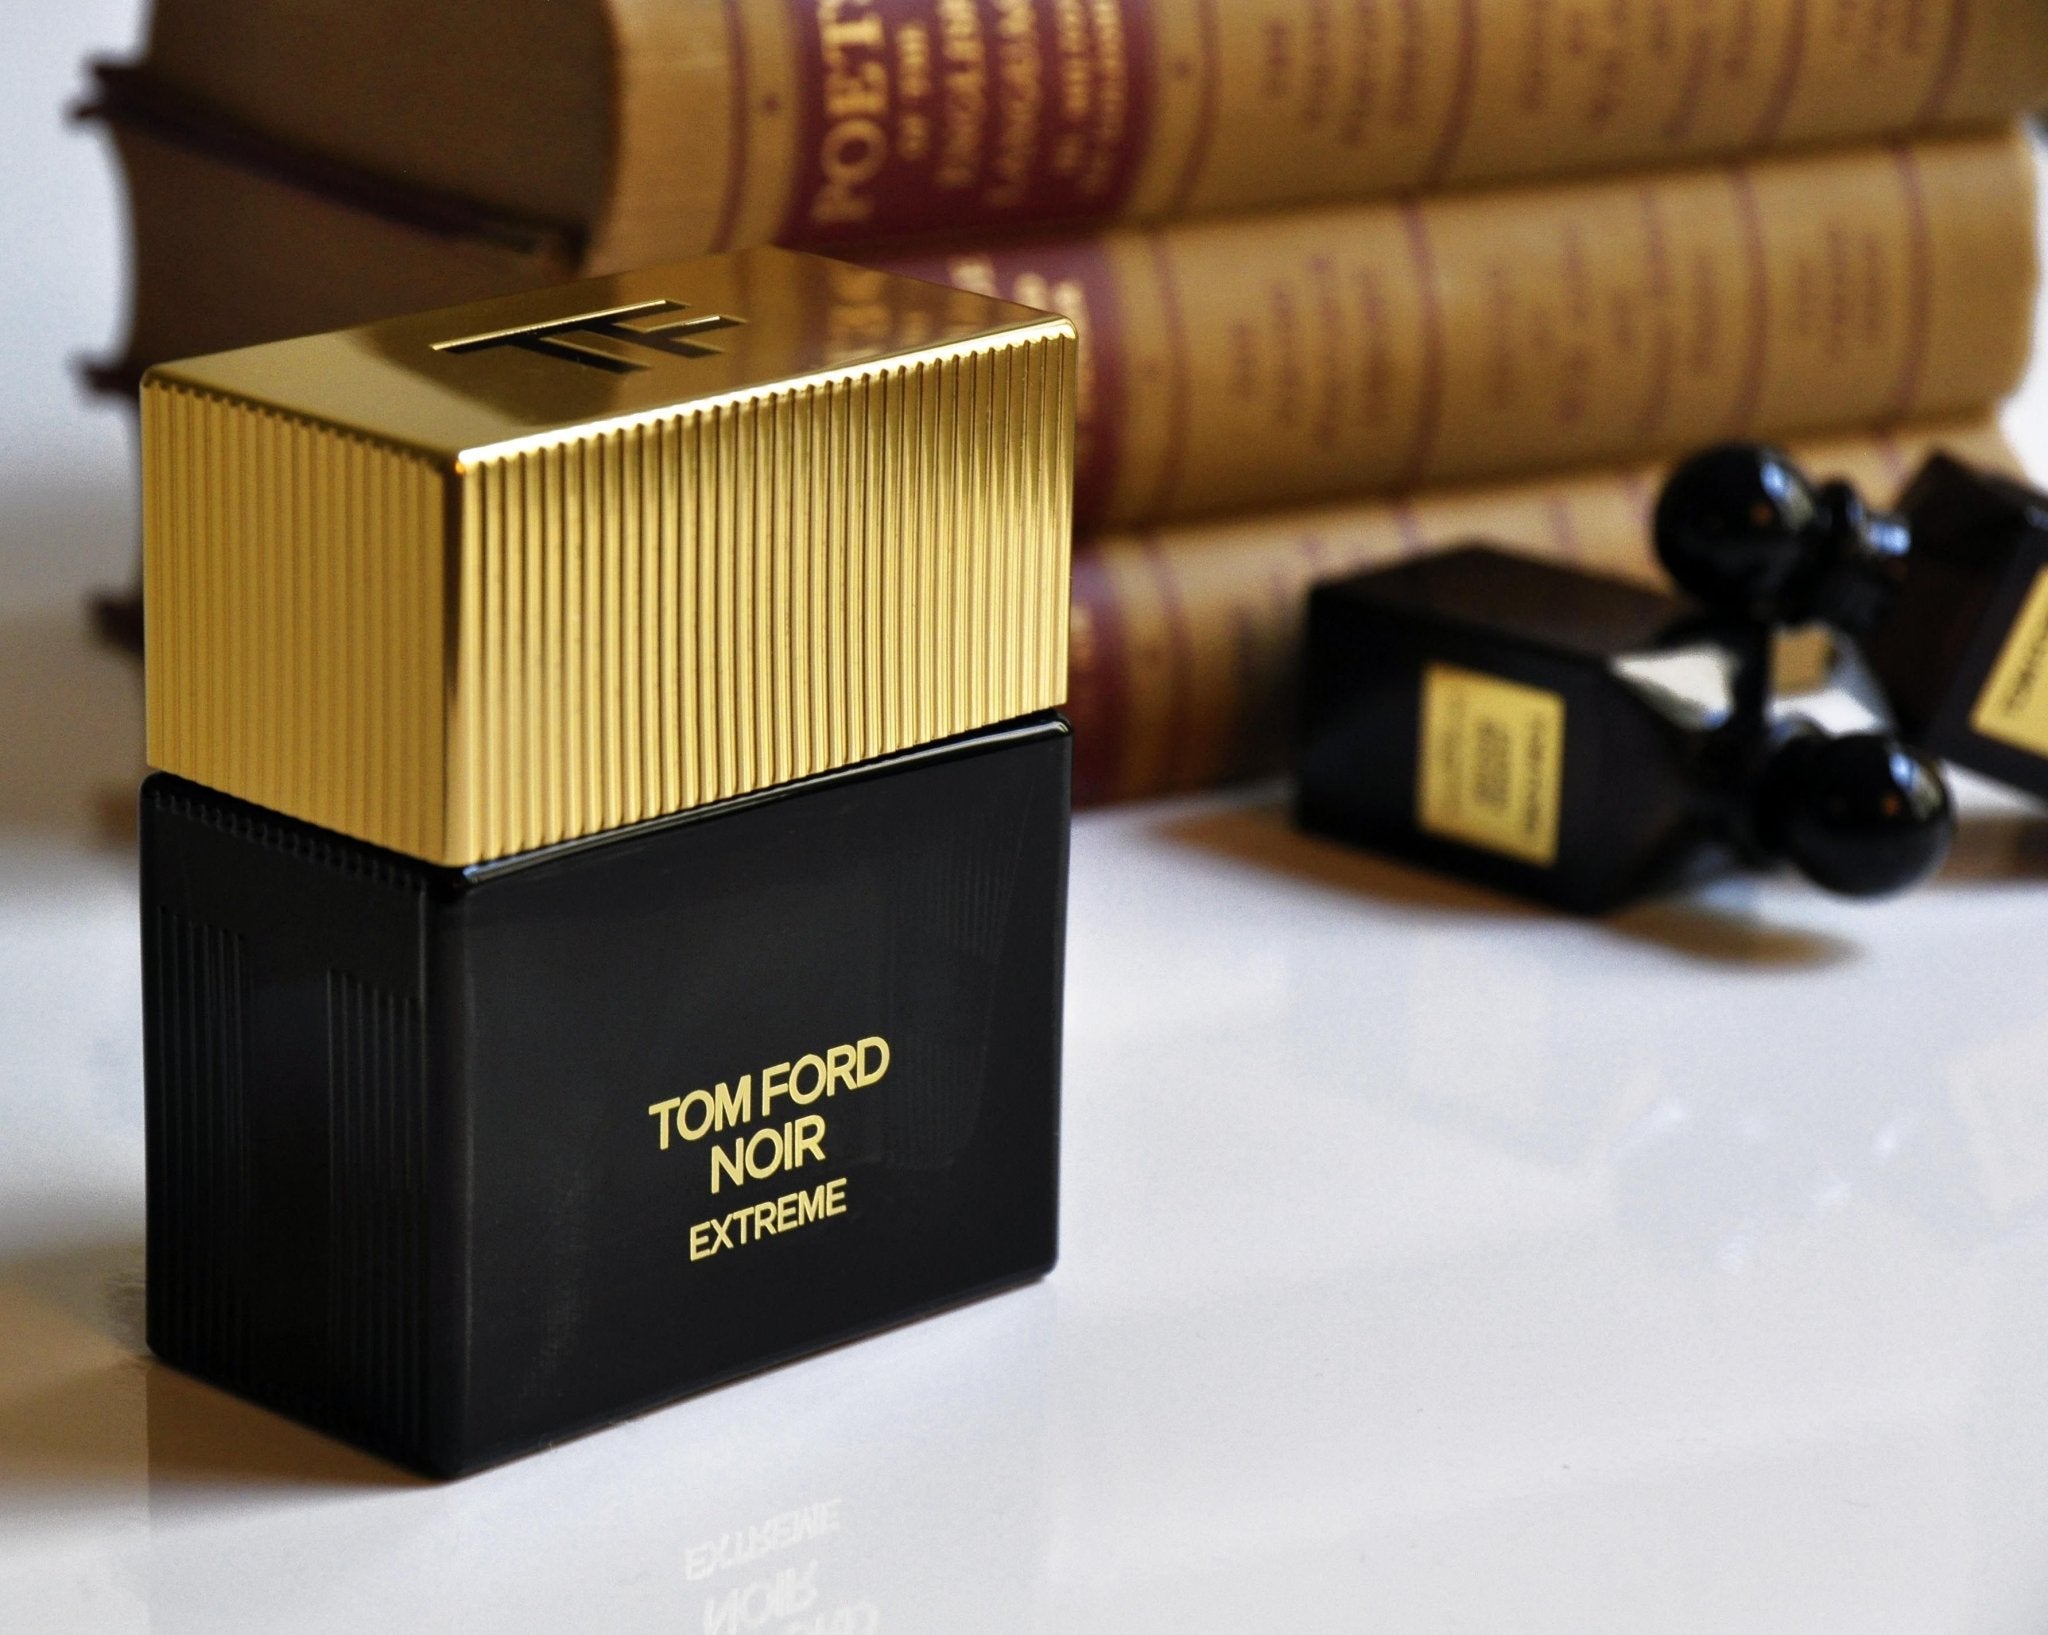 TOM FORD Noir vs. Noir Extreme: What’s the Difference? - My Perfume Shop